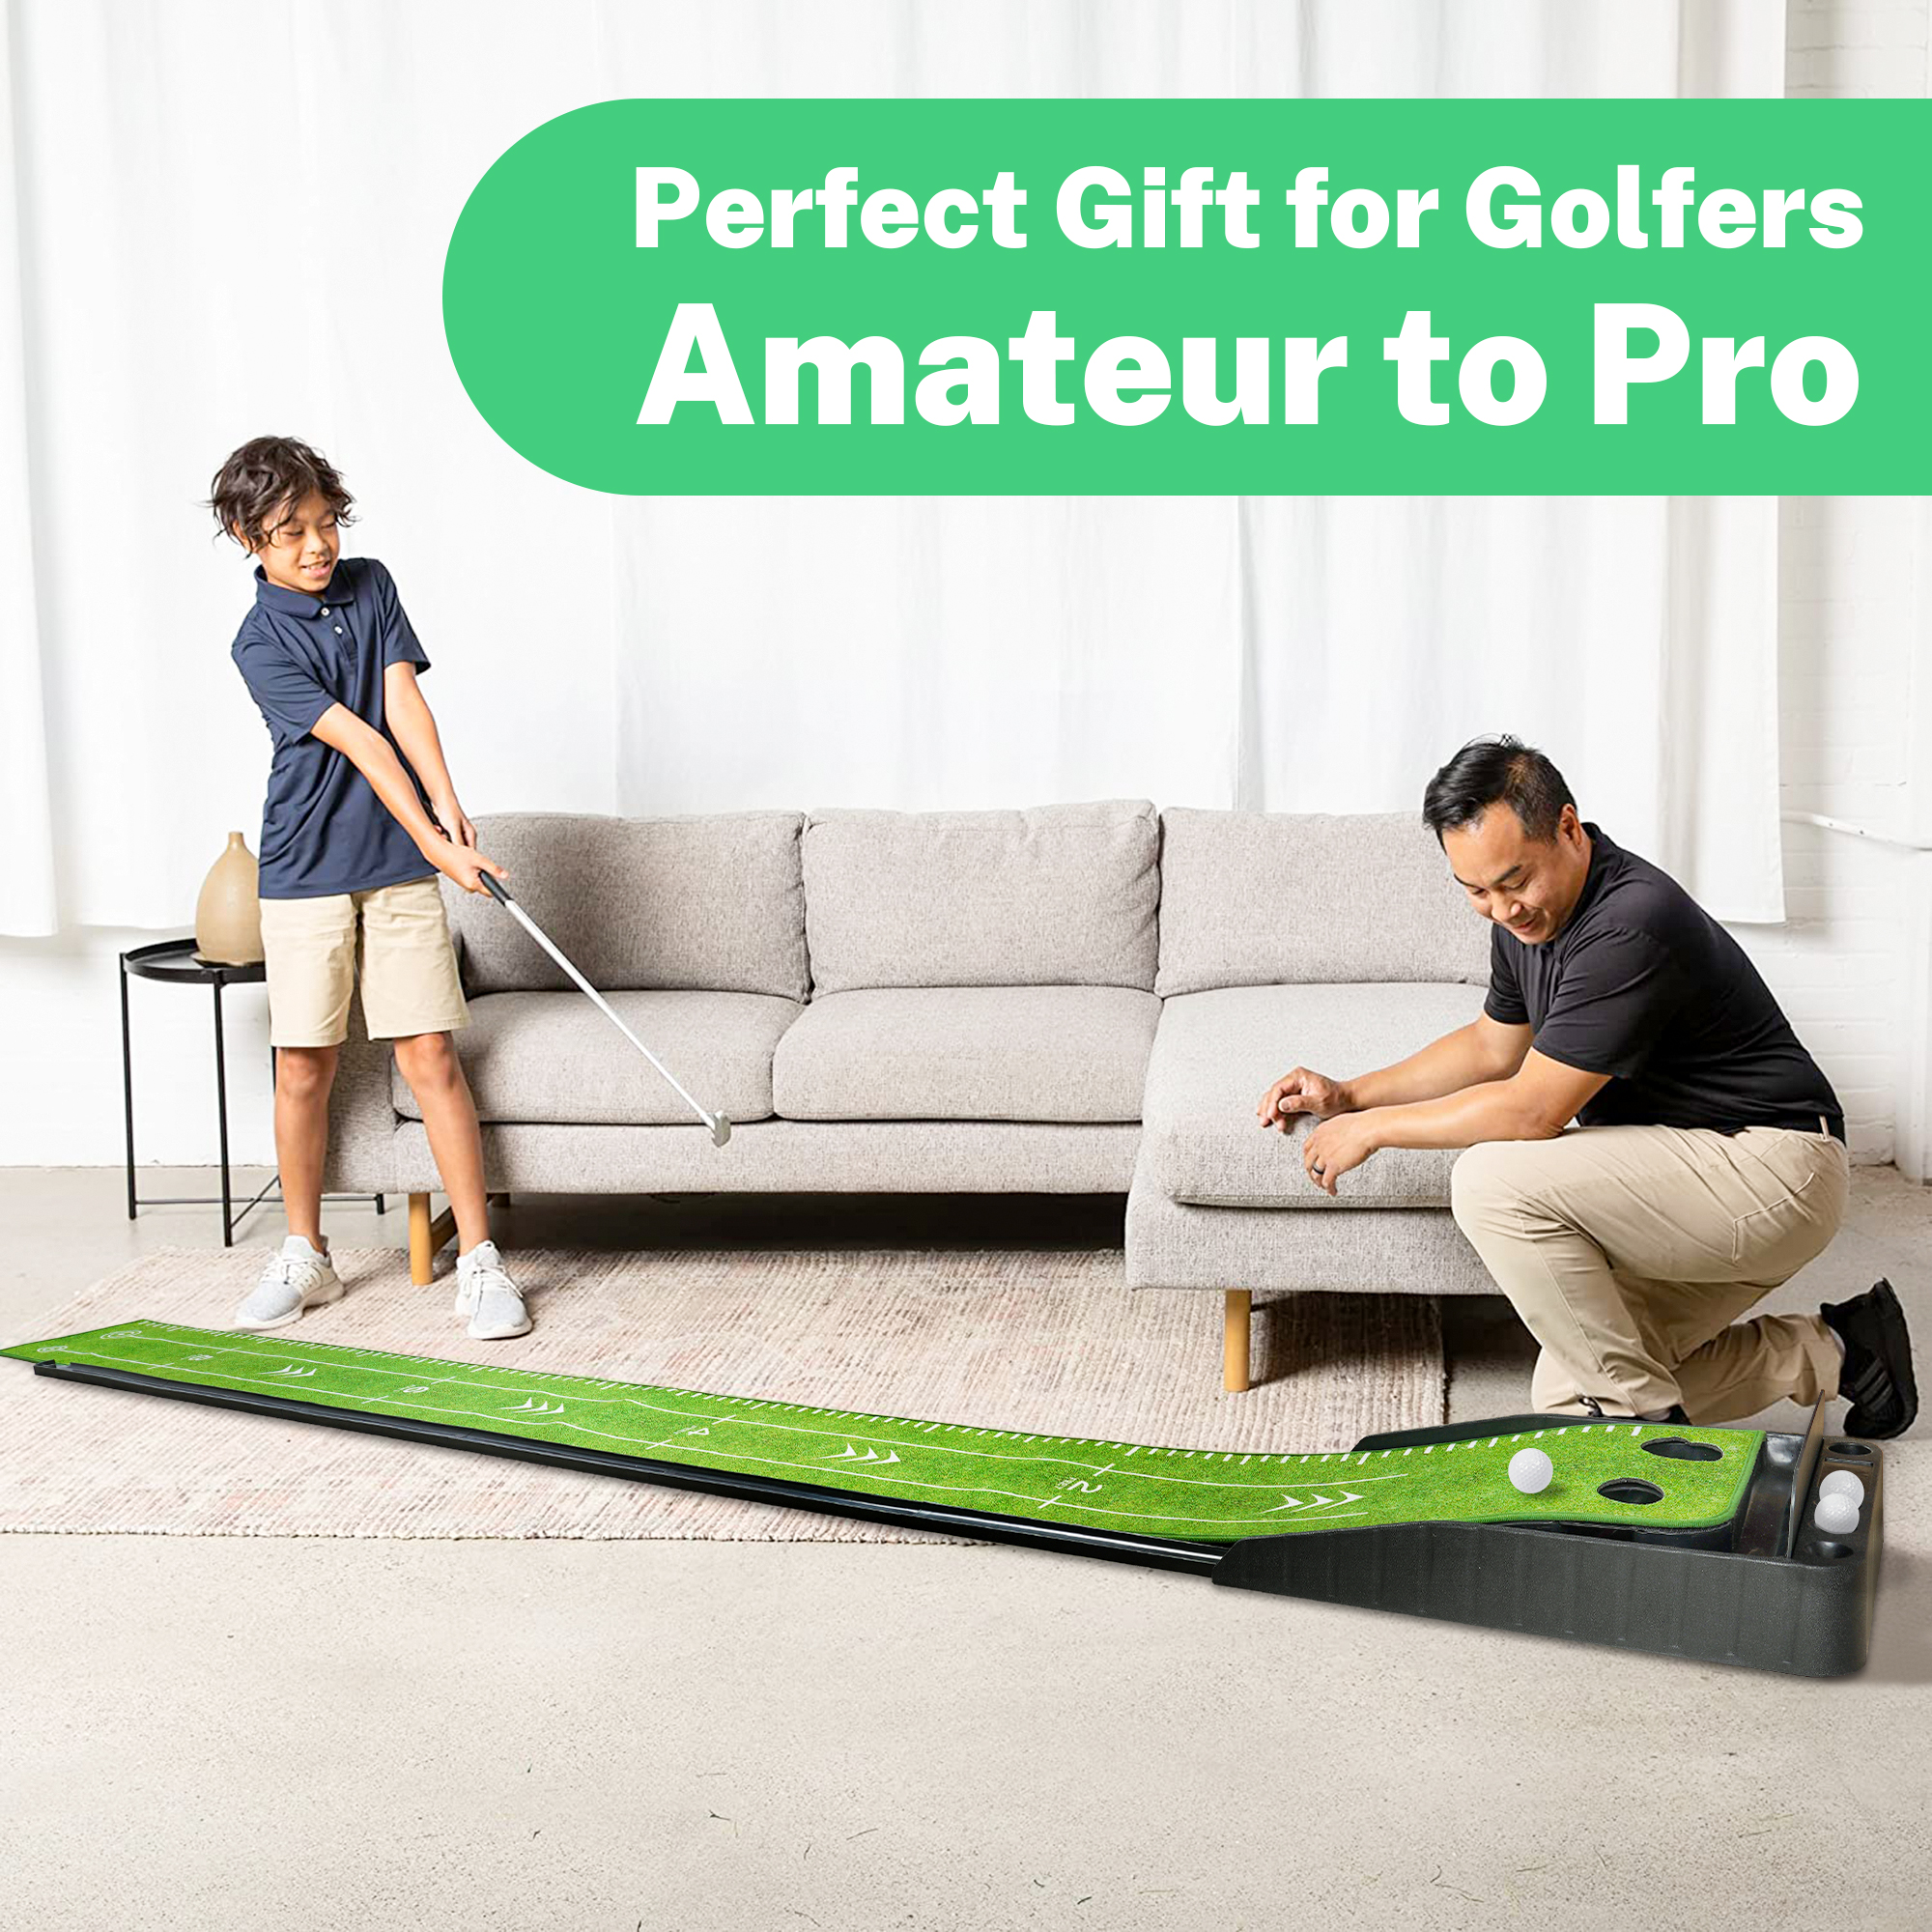 Segmart Putting Green Golf Mat for Indoors, Golf Training Bundles with 3 Bonus Balls, Improve Accuracy and Speed, Auto Ball Return, Indoor/Outdoor Practice Golf Accessories Golf Gift for Men - image 4 of 9